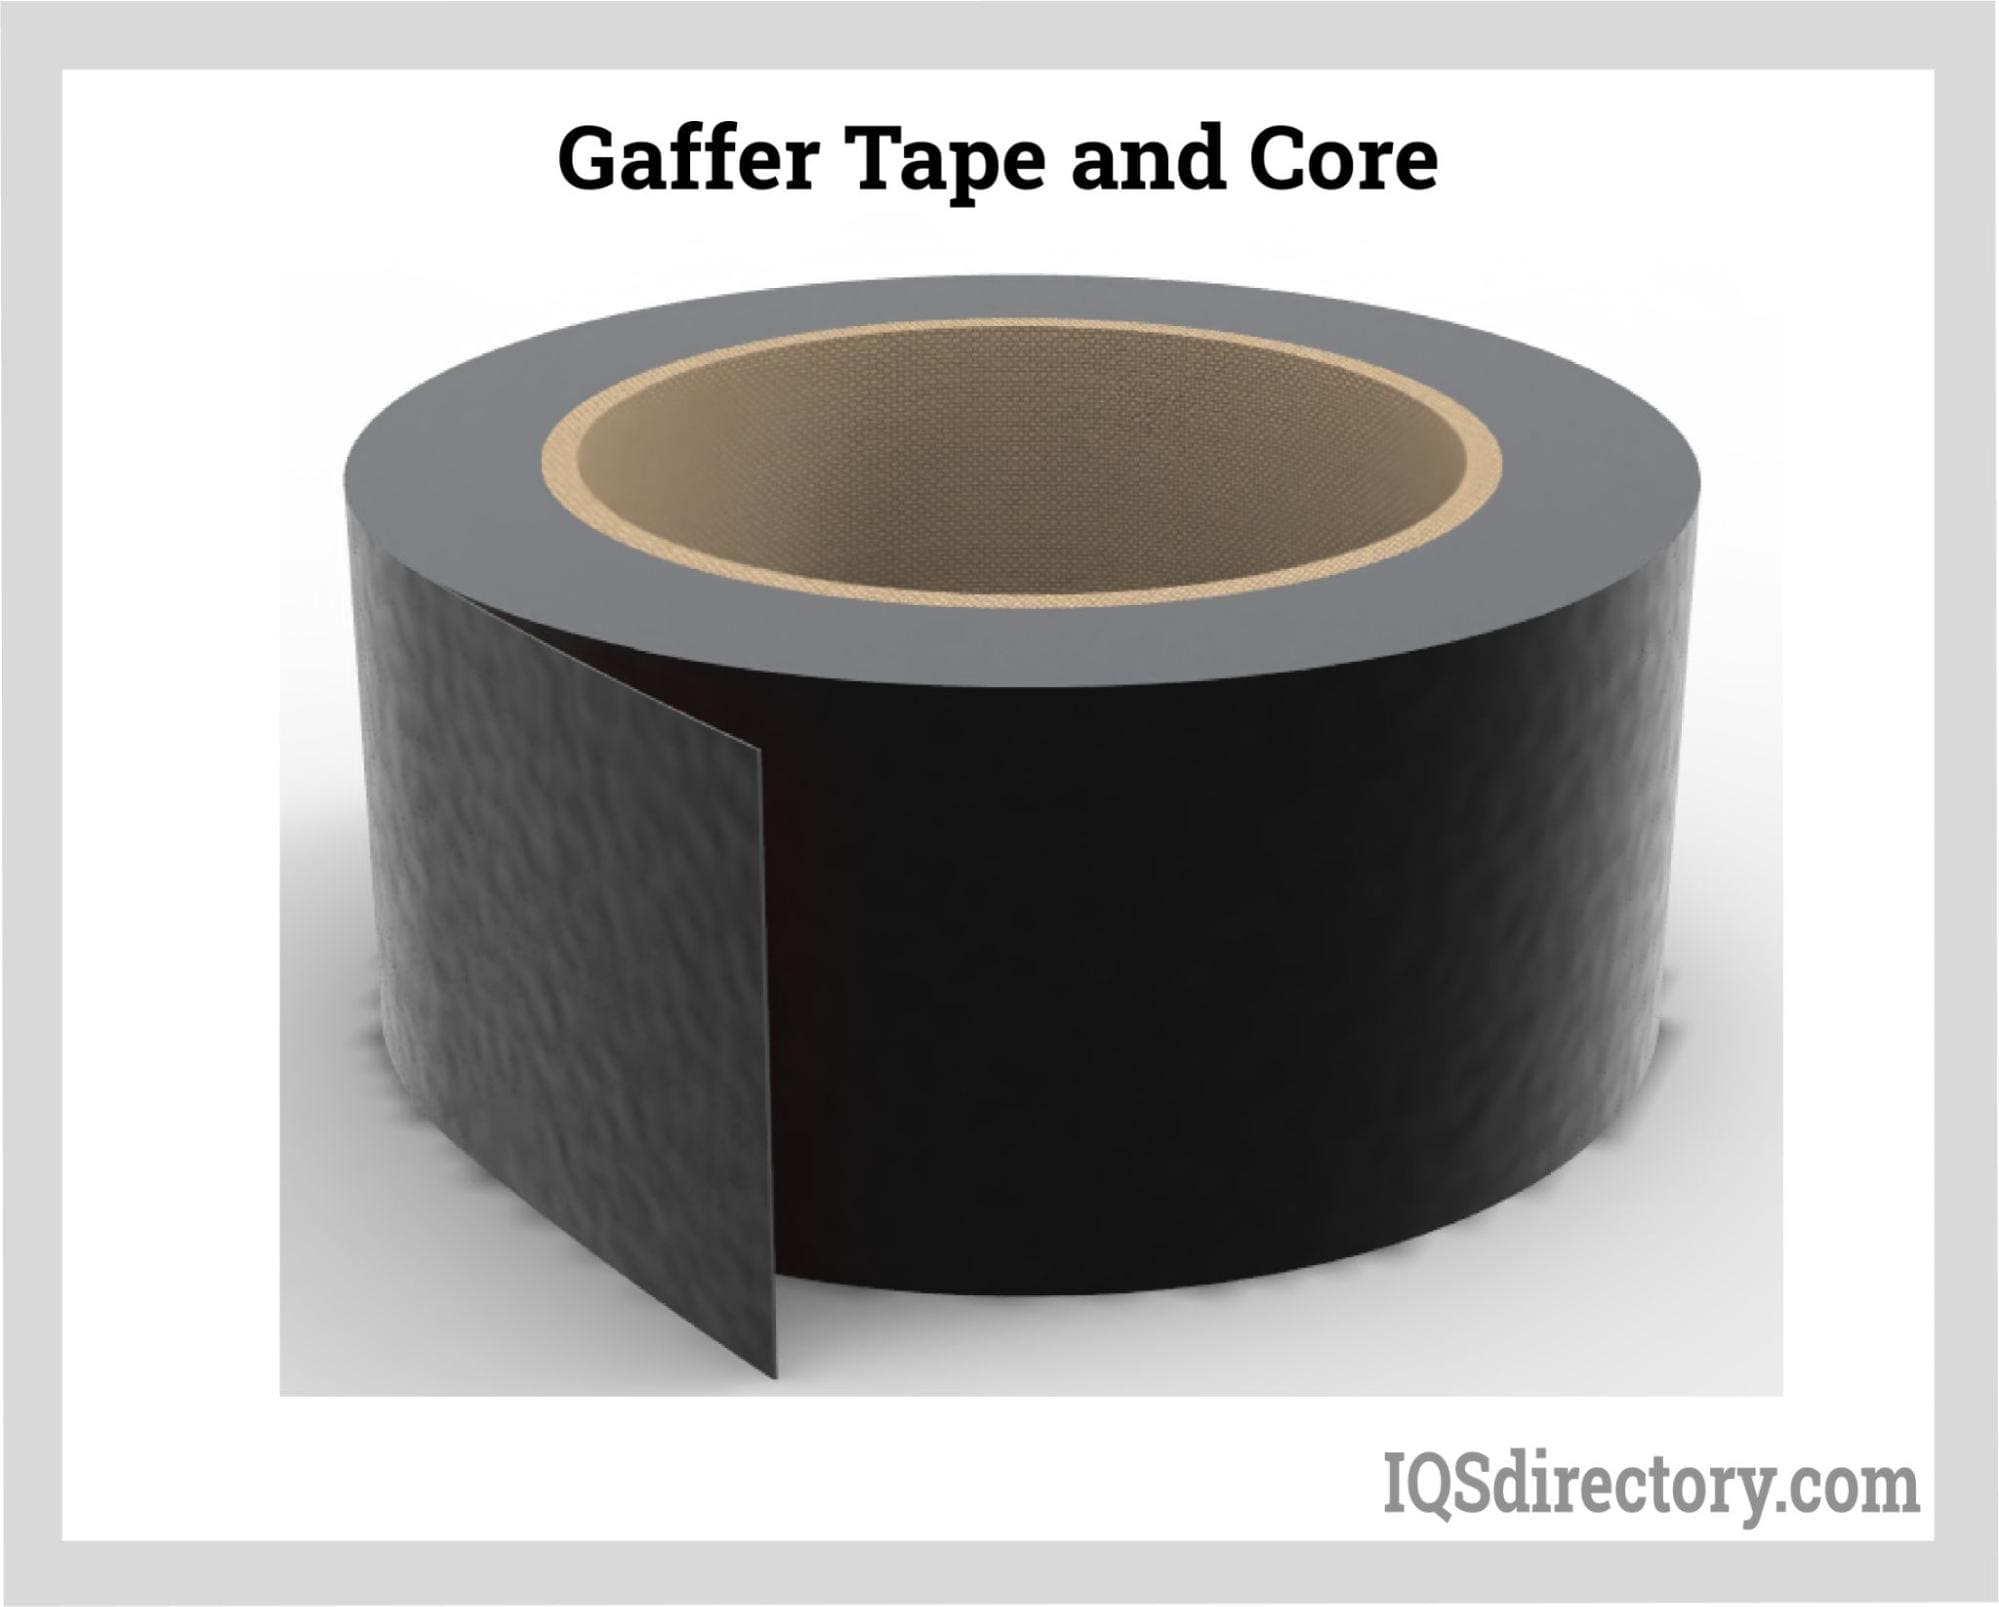 Gaffer Tape and Core